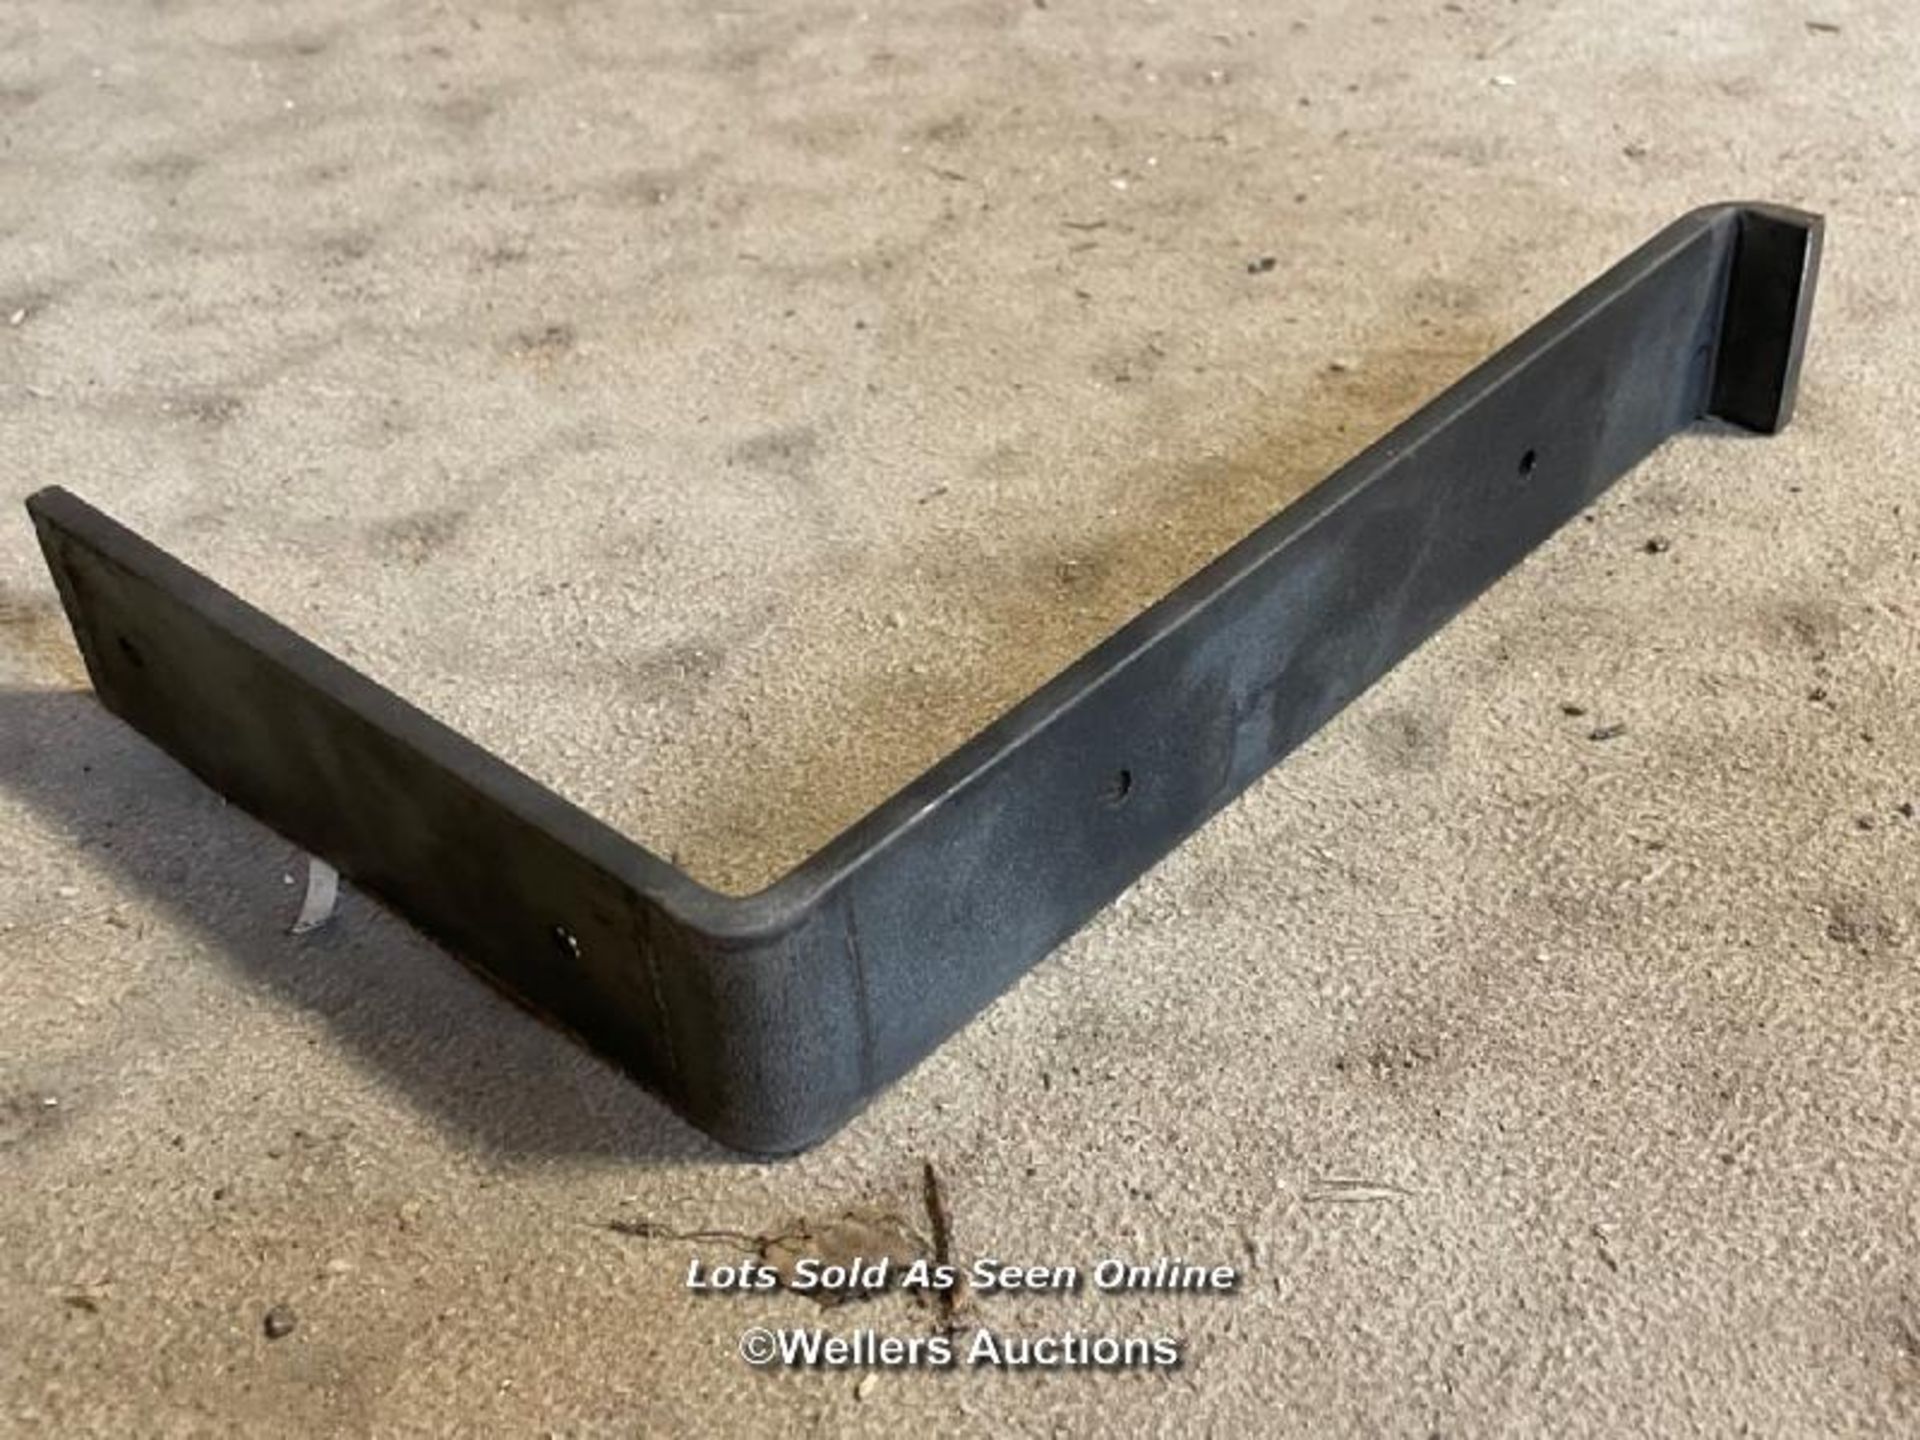 52 metal shelf brackets. 23cm x 15.5cm x 4cm for scaffold boards or other shelving - Image 2 of 5